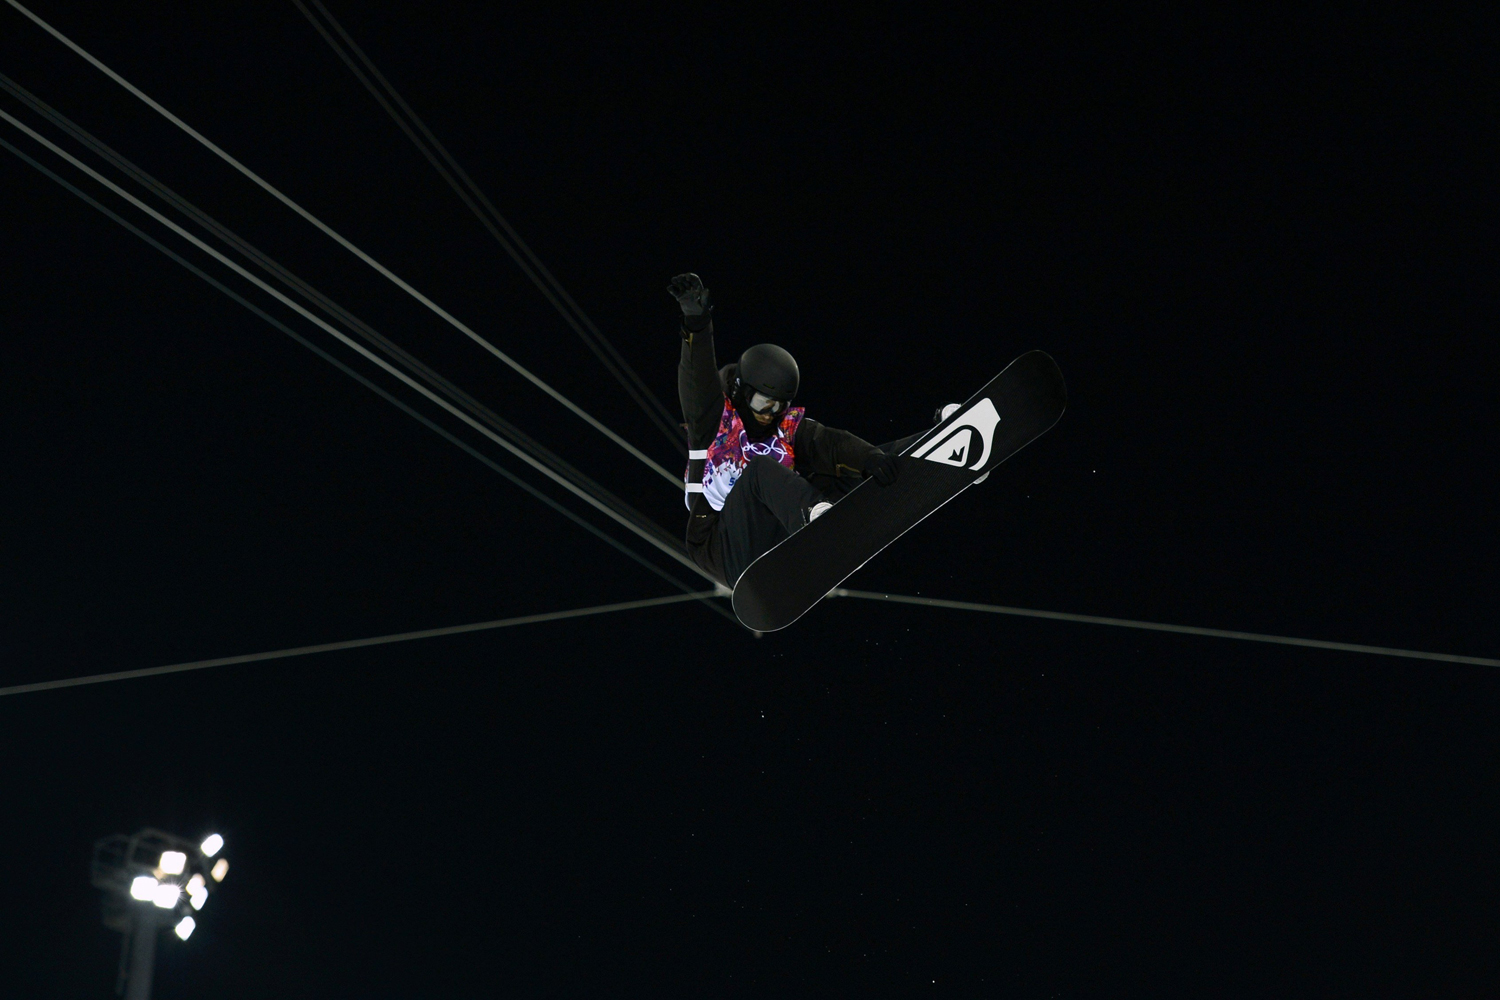 Podladtchikov performs a jump during the men's snowboard halfpipe semi-final event at the 2014 Sochi Winter Olympic Games